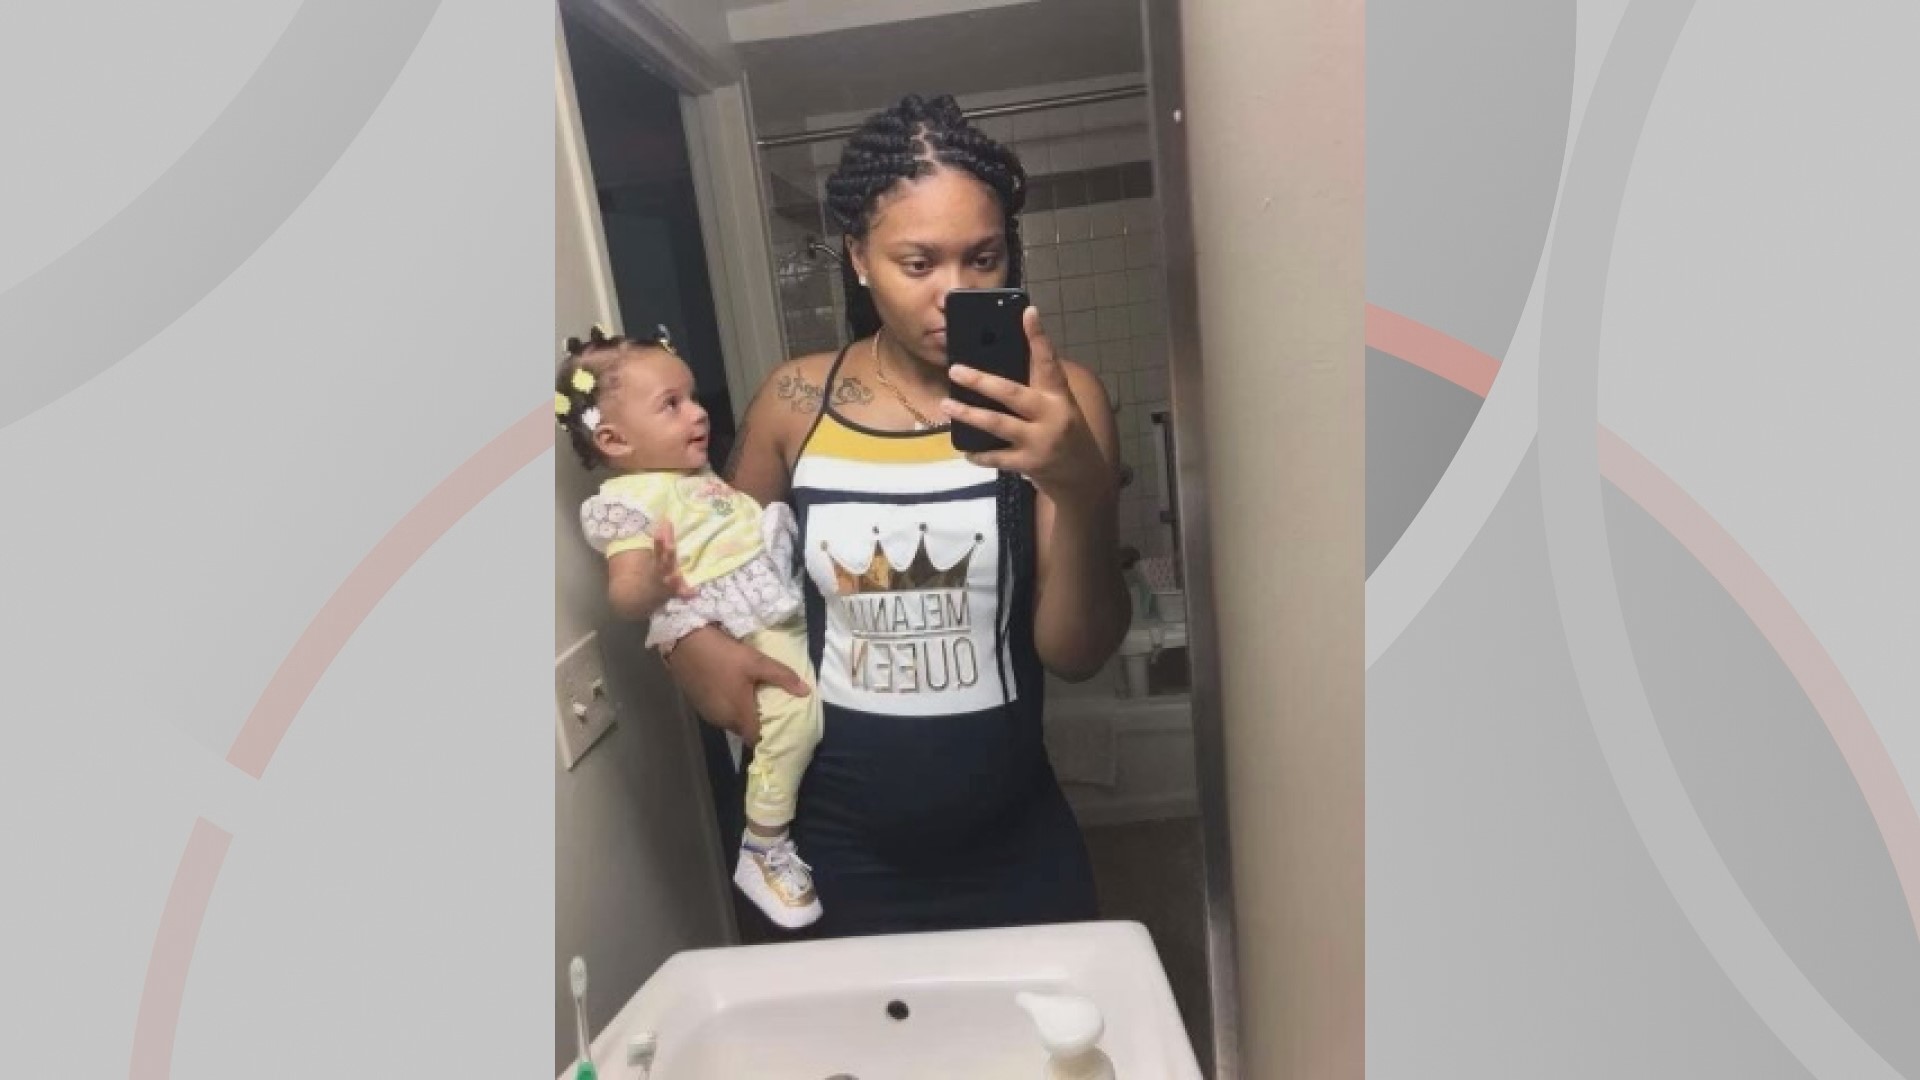 The Cuyahoga County Medical Examiner stated that its testing 'does not indicate that police activity was directly responsible' for Carter's death.